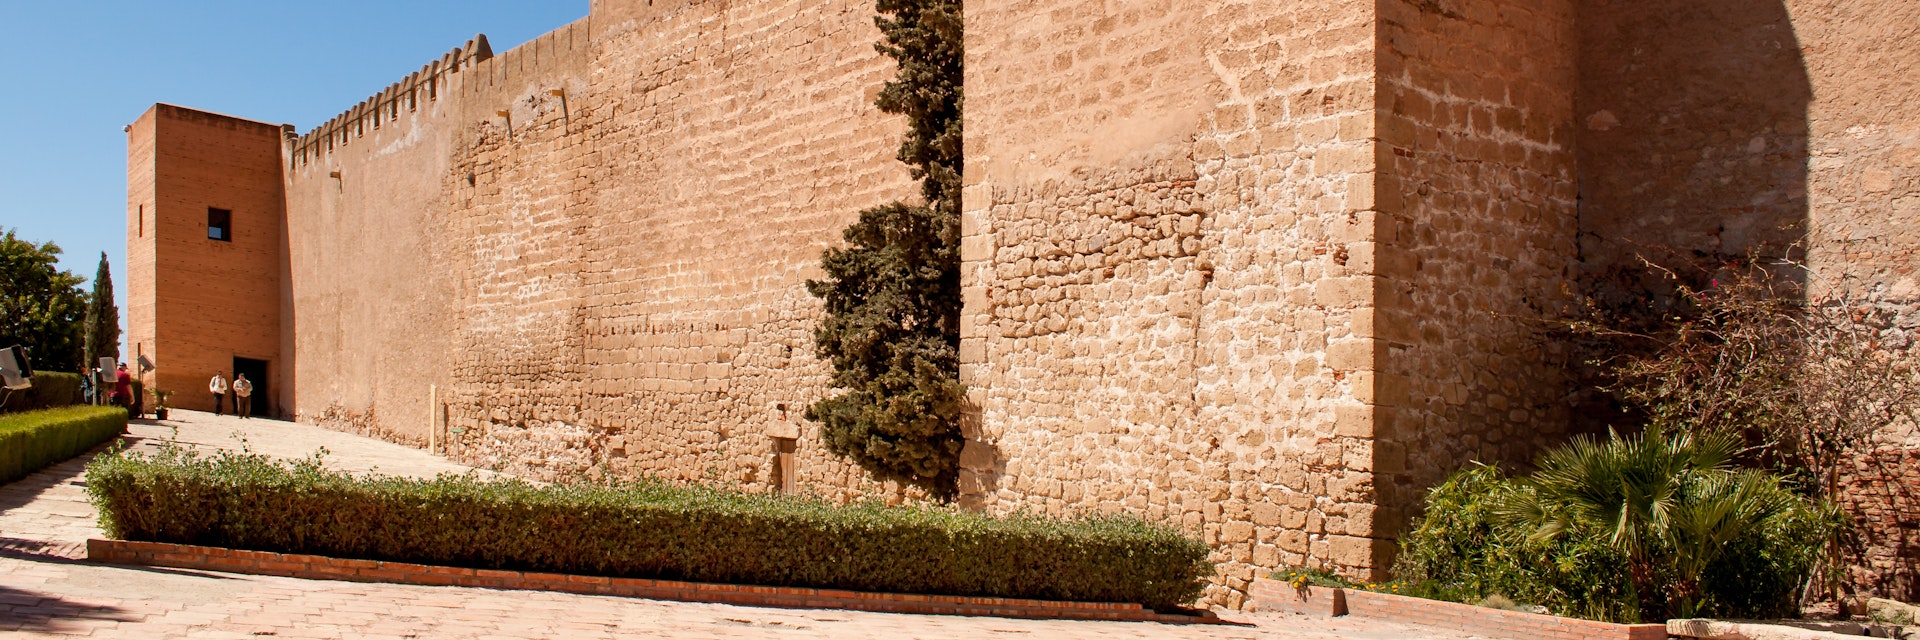 The sail wall with its bell, which separates the first and second enclosures of the fortress in Alcazaba, Almeria, Spain.